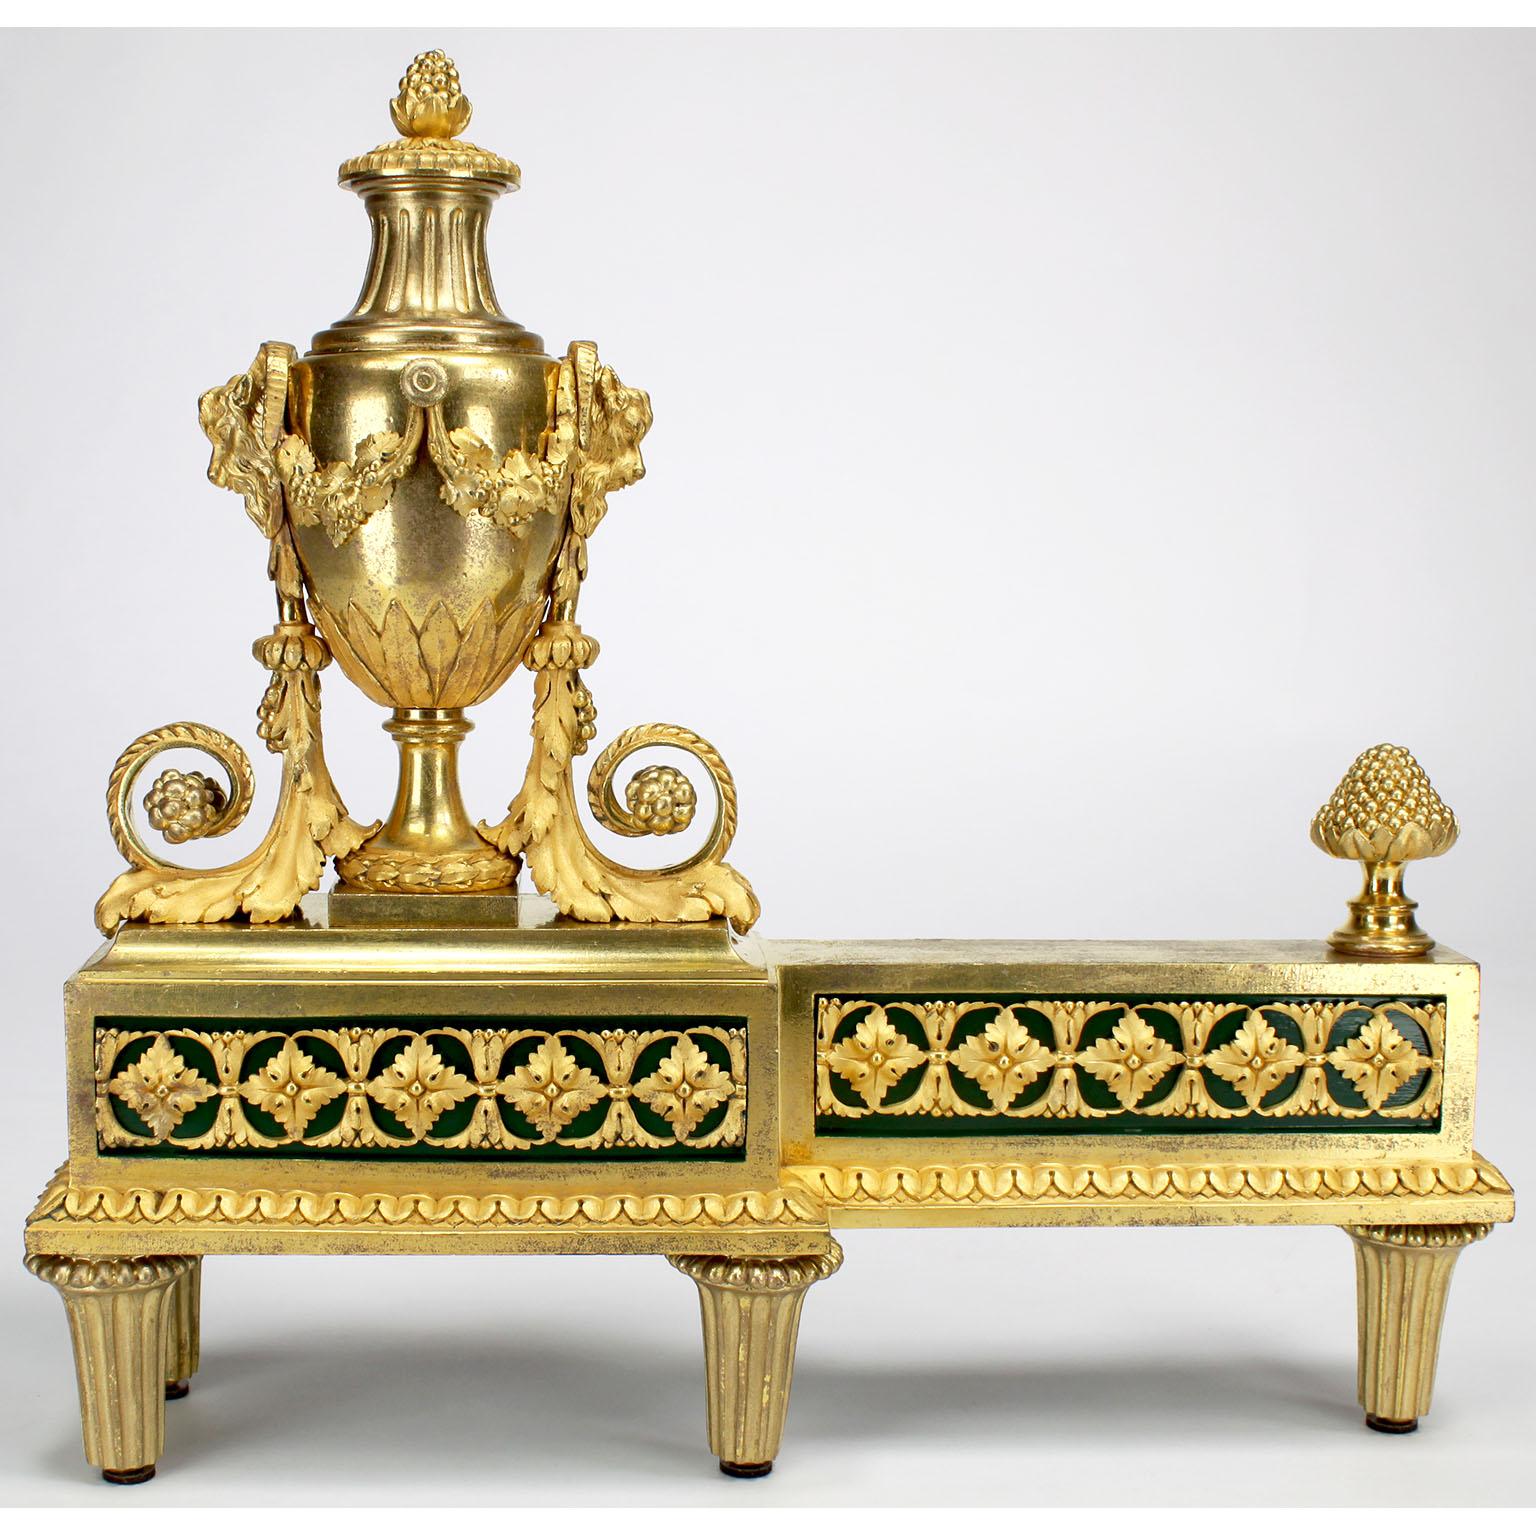 A very fine and rare pair of French 19th century Louis XVI style Ormolu Figural Chenets, by Henry Dasson (French, 1825-1896). The finely chased satin and mercury gilt bronze andirons, each surmounted with an allegorical neoclassical style urn